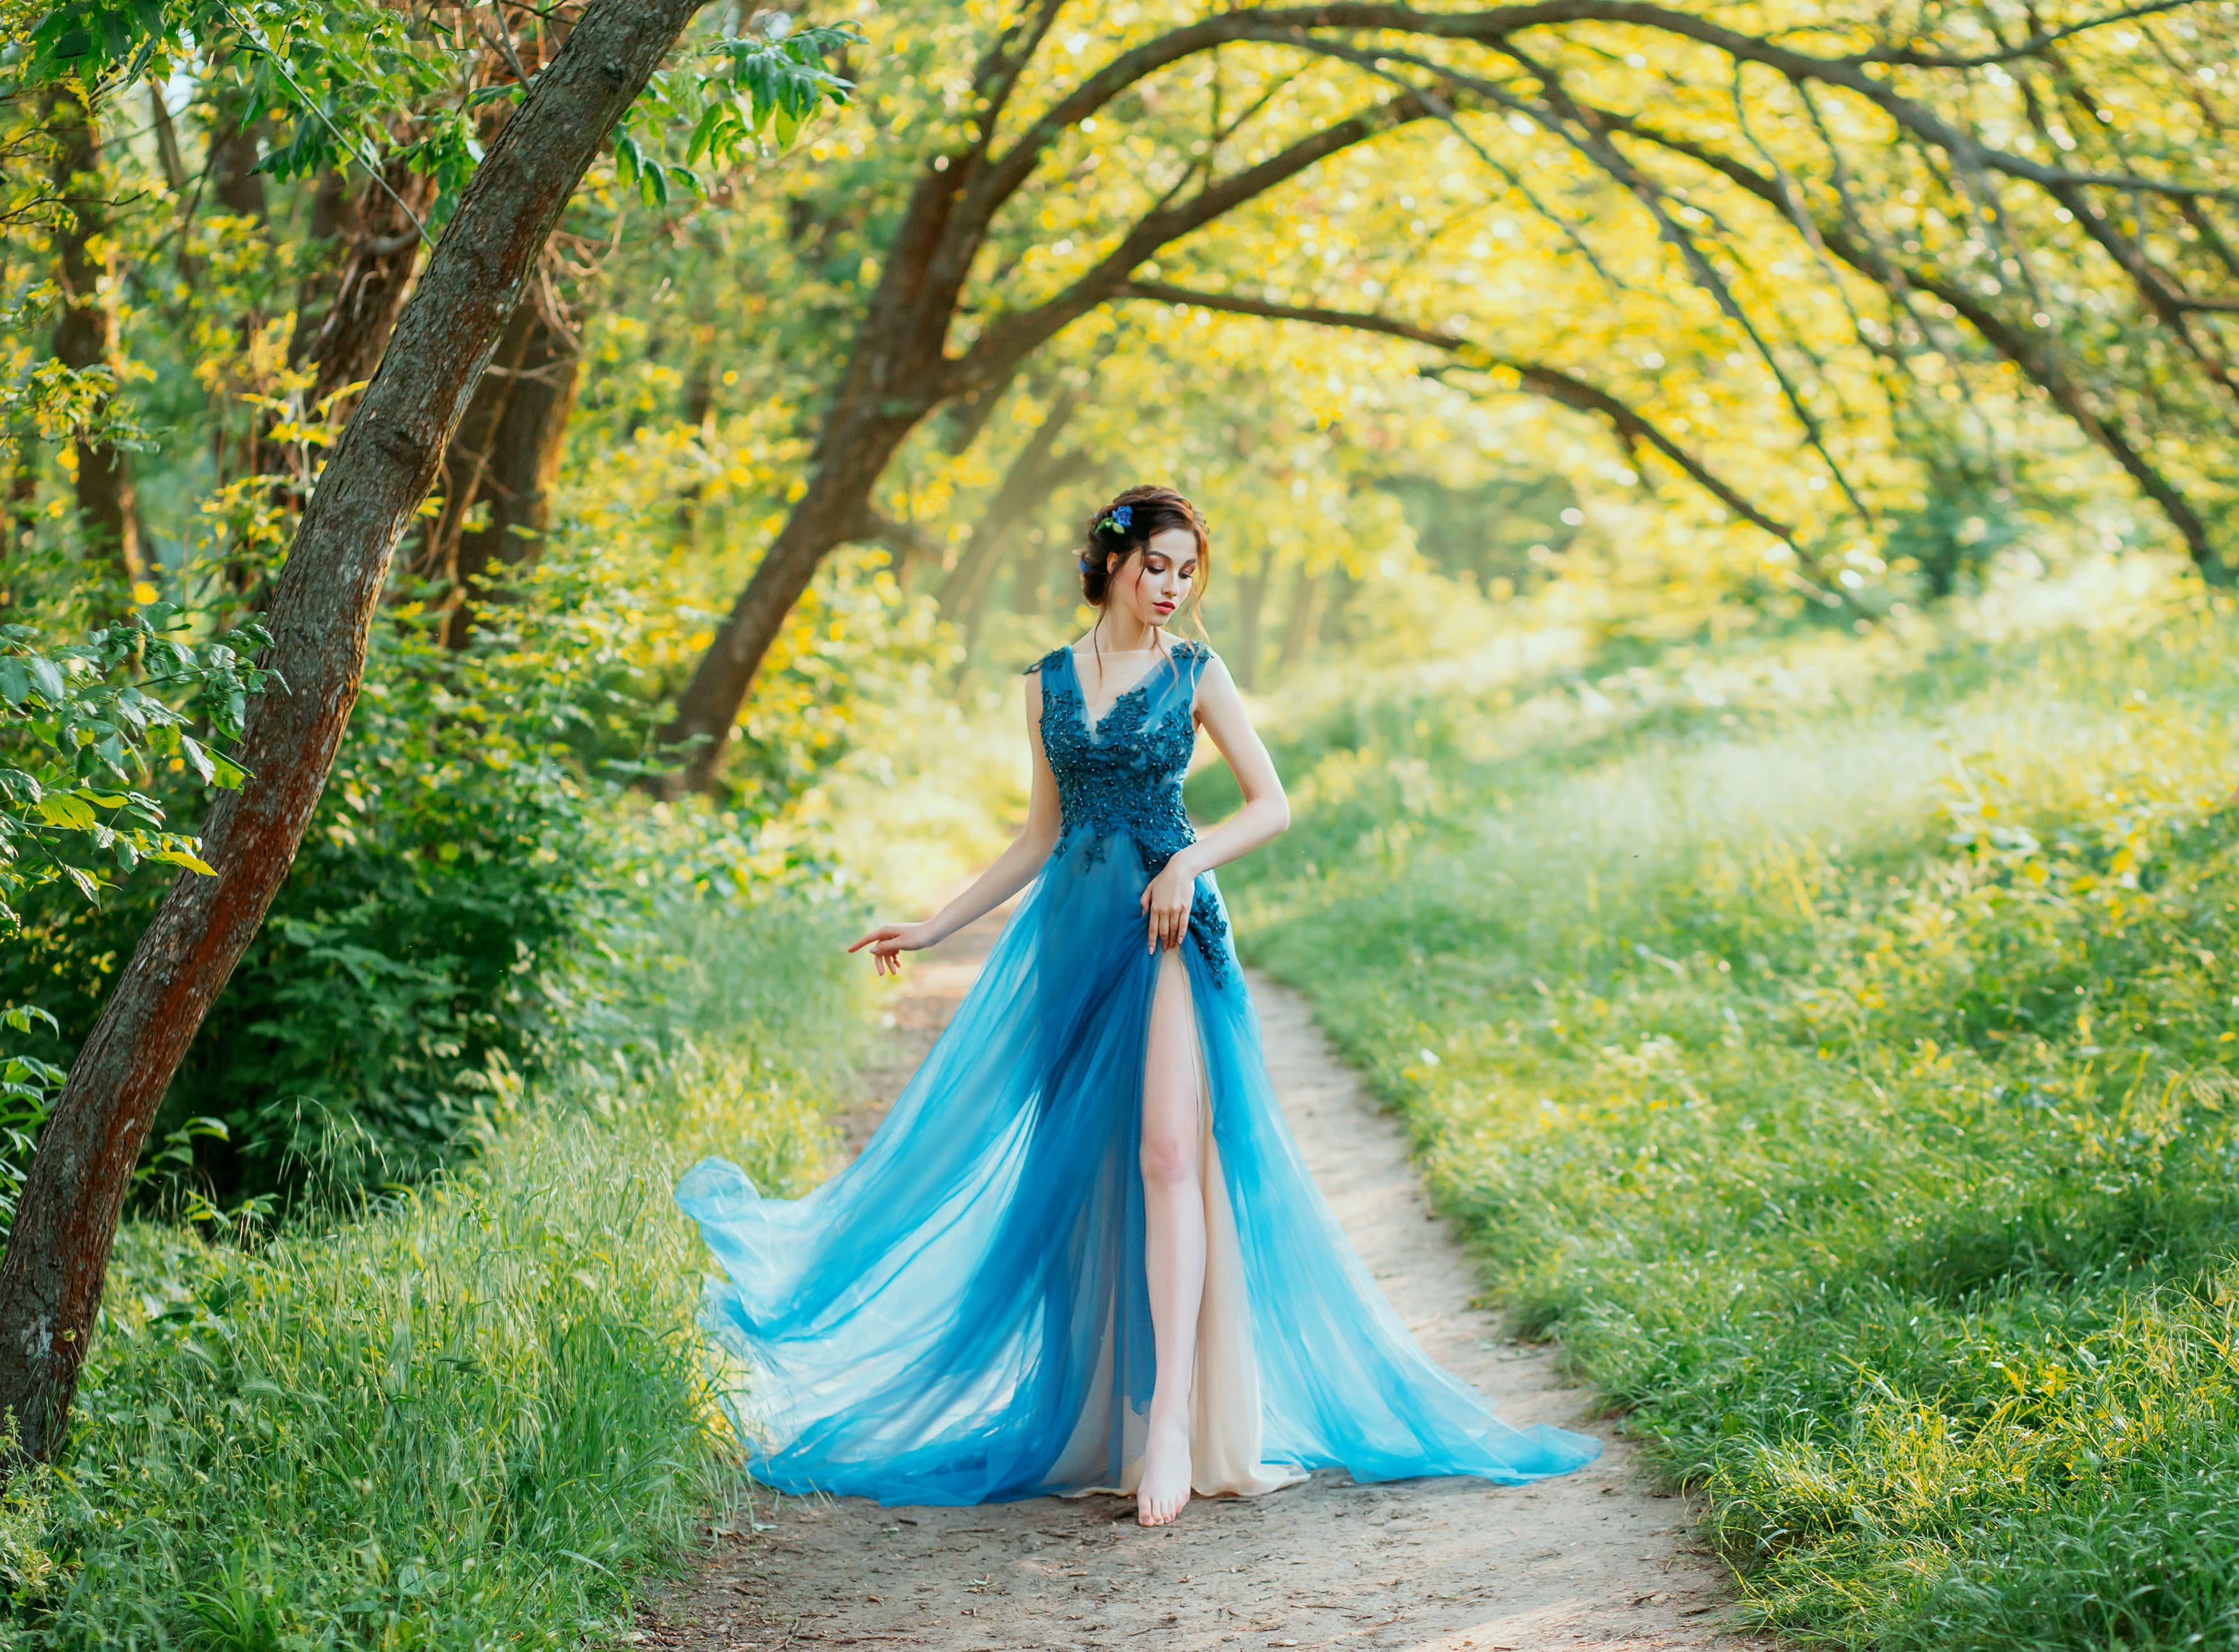 lonely sexy girl naked leg walk foliage green forest evening chic dress. hair decorated blue flowers of cornflowers. Elegant brunette hairstyle. sunny bright day nature summer spring wedding party art